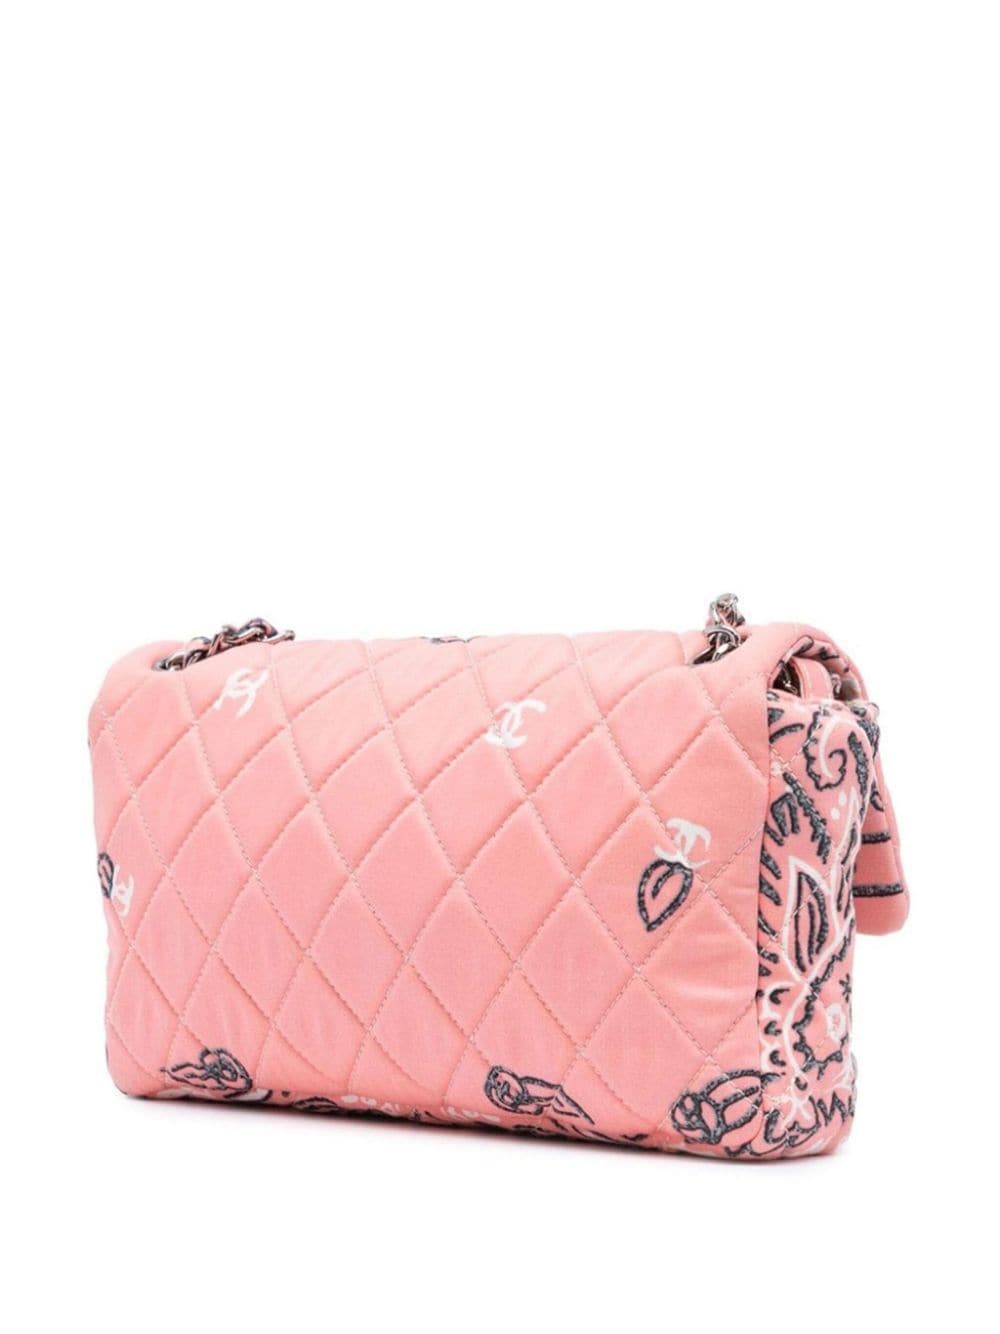 Pre-owned Chanel 2008 Classic Flap Shoulder Bag In Pink